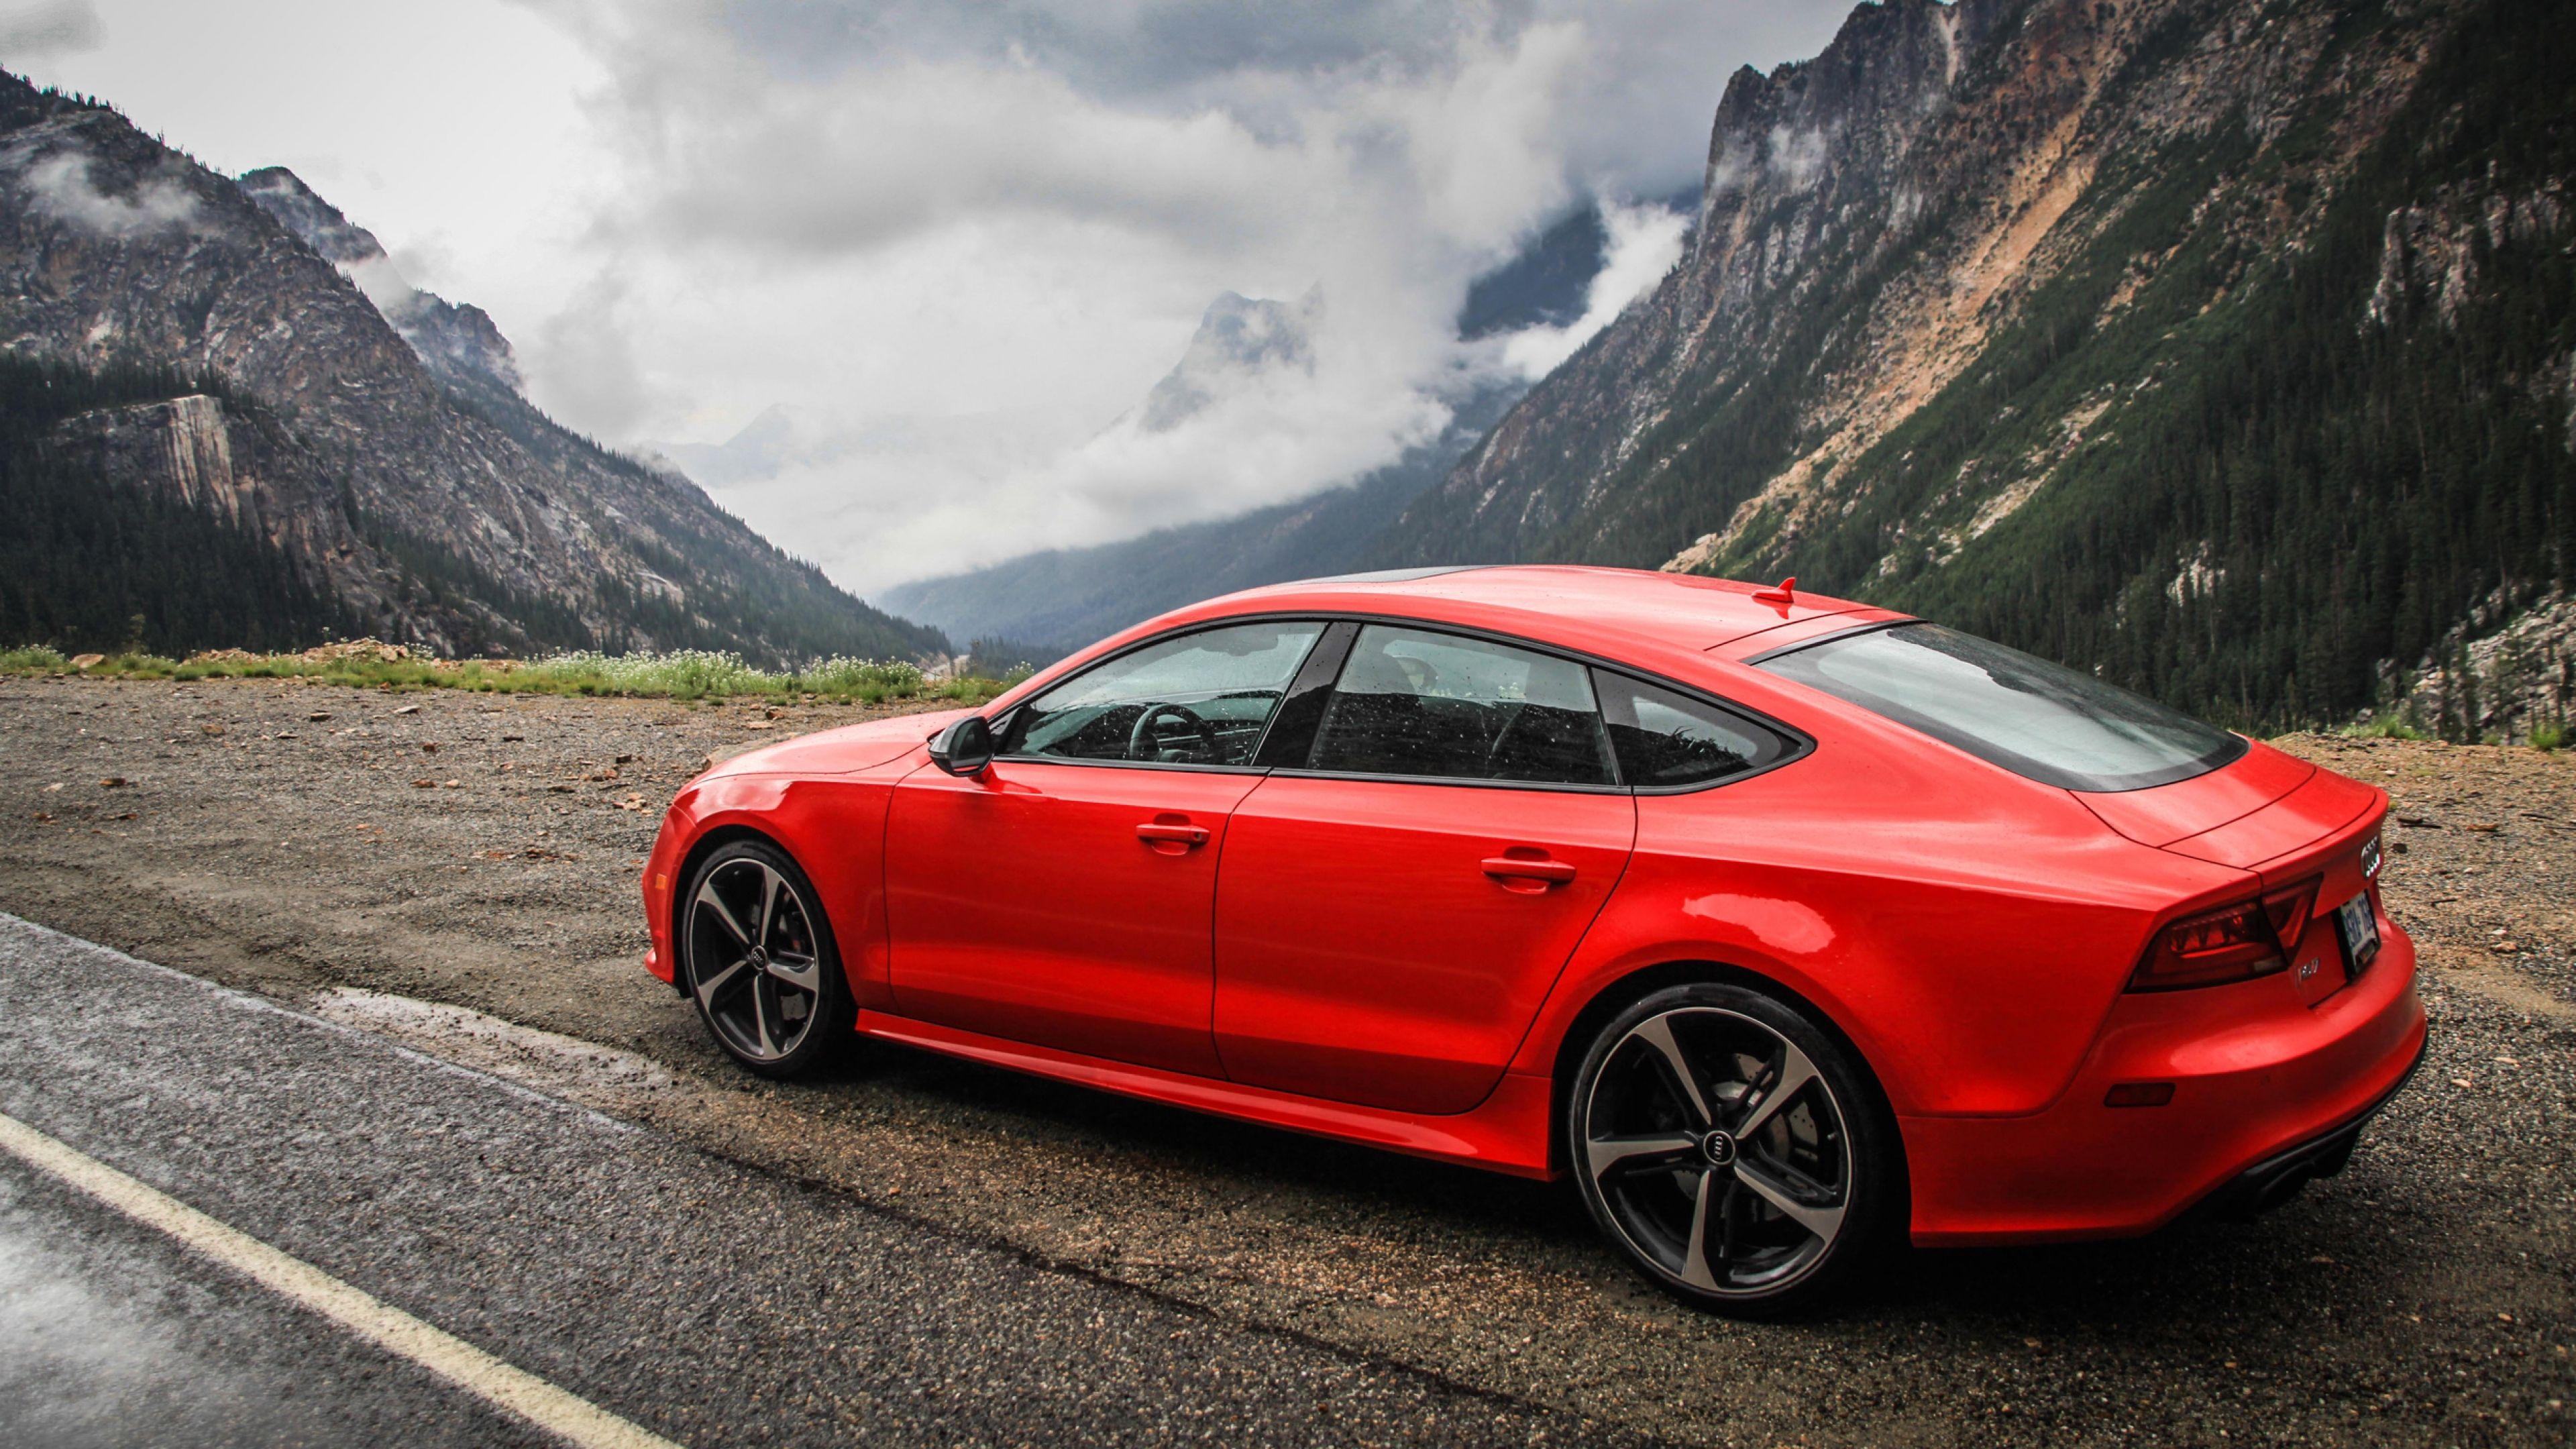 Download Wallpaper Audi, Rs7, Red, Side View, Mountain - Audi Rs7 Wallpaper Hd , HD Wallpaper & Backgrounds